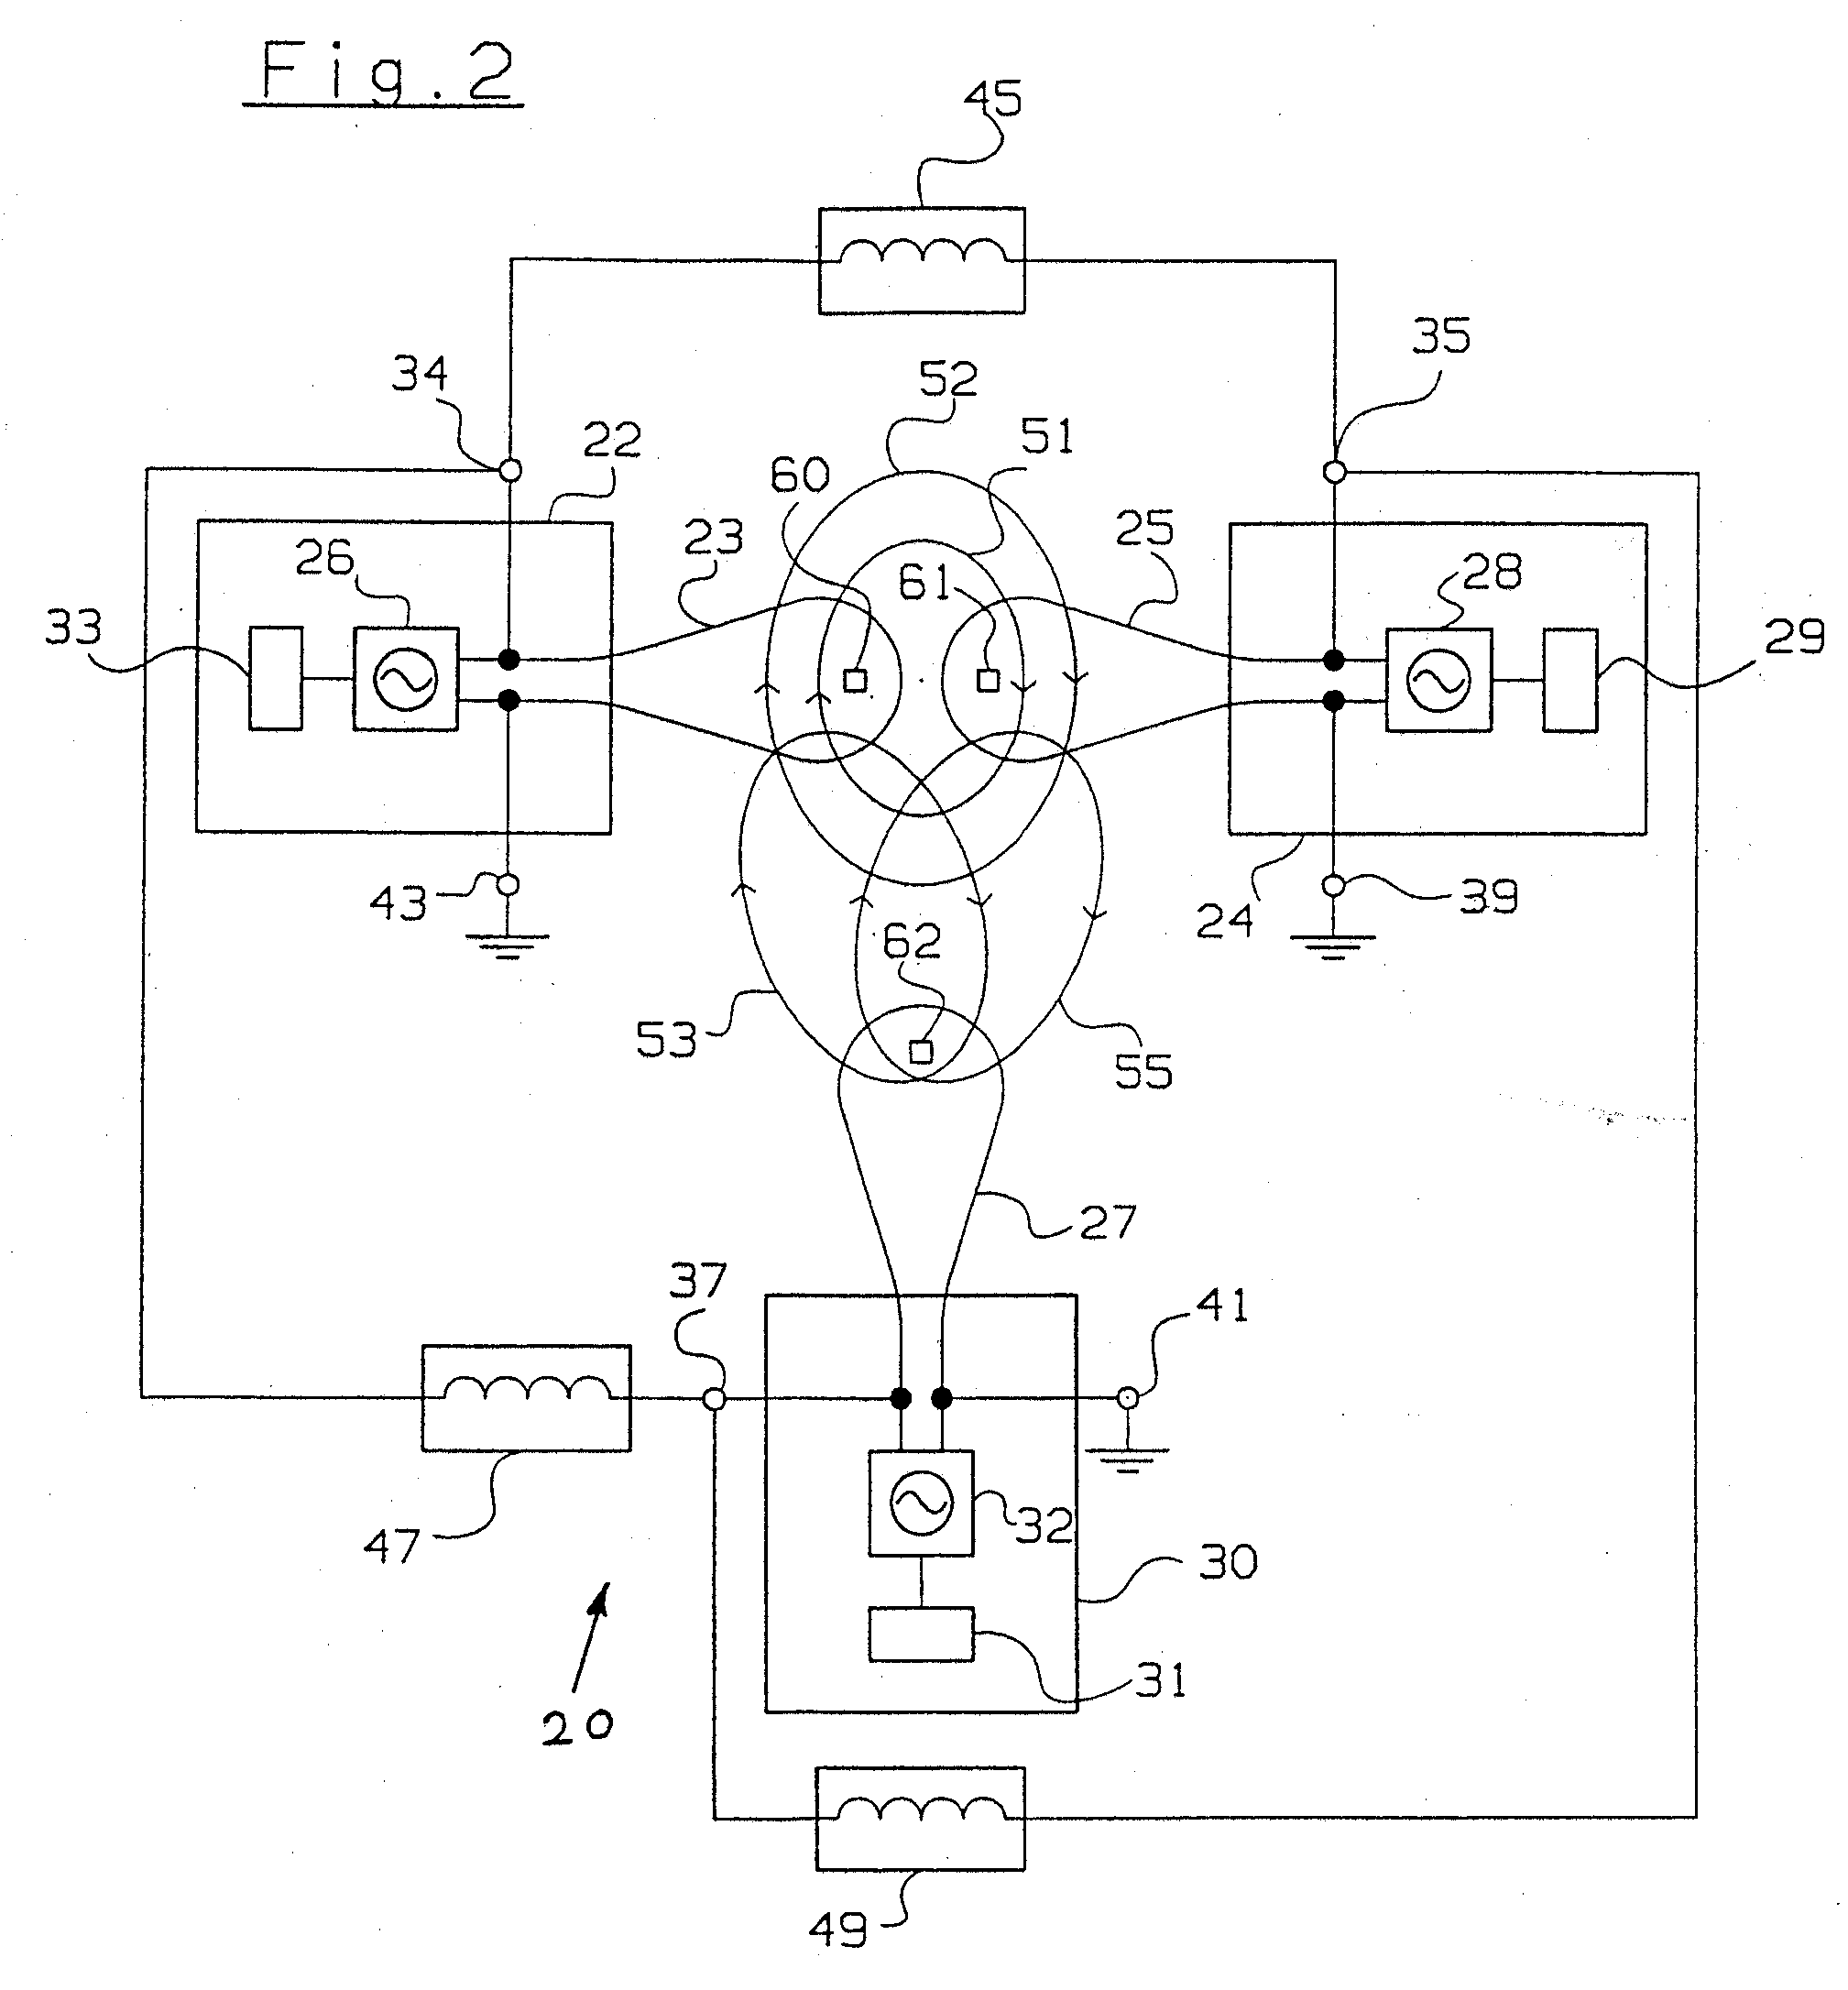 Radio frequency detection system for a medical device and process